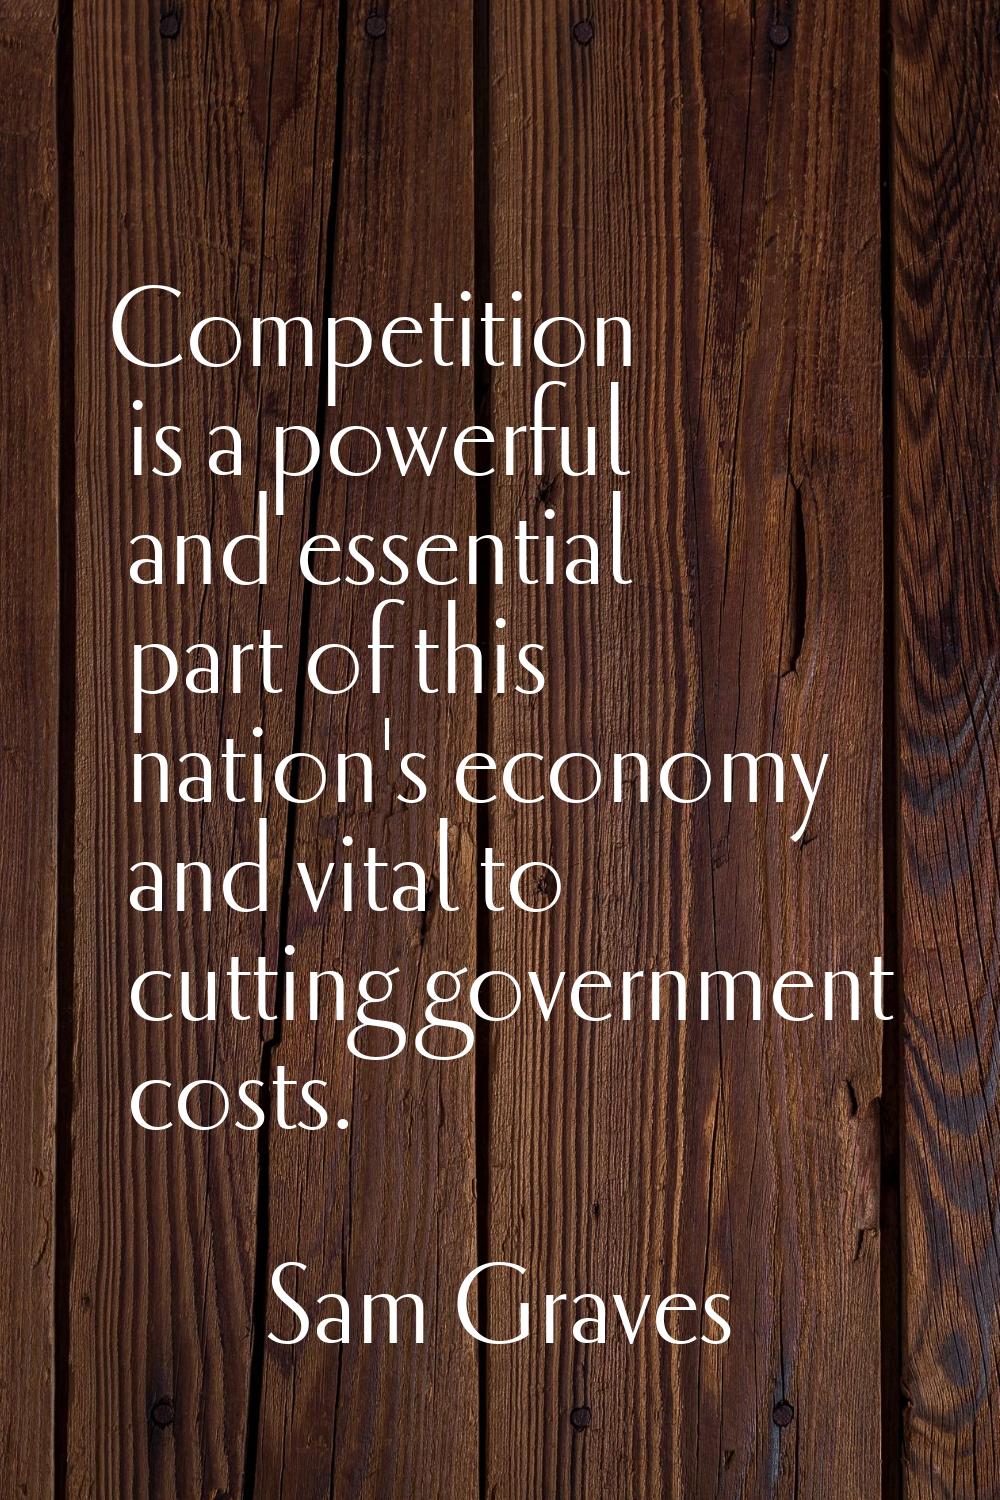 Competition is a powerful and essential part of this nation's economy and vital to cutting governme